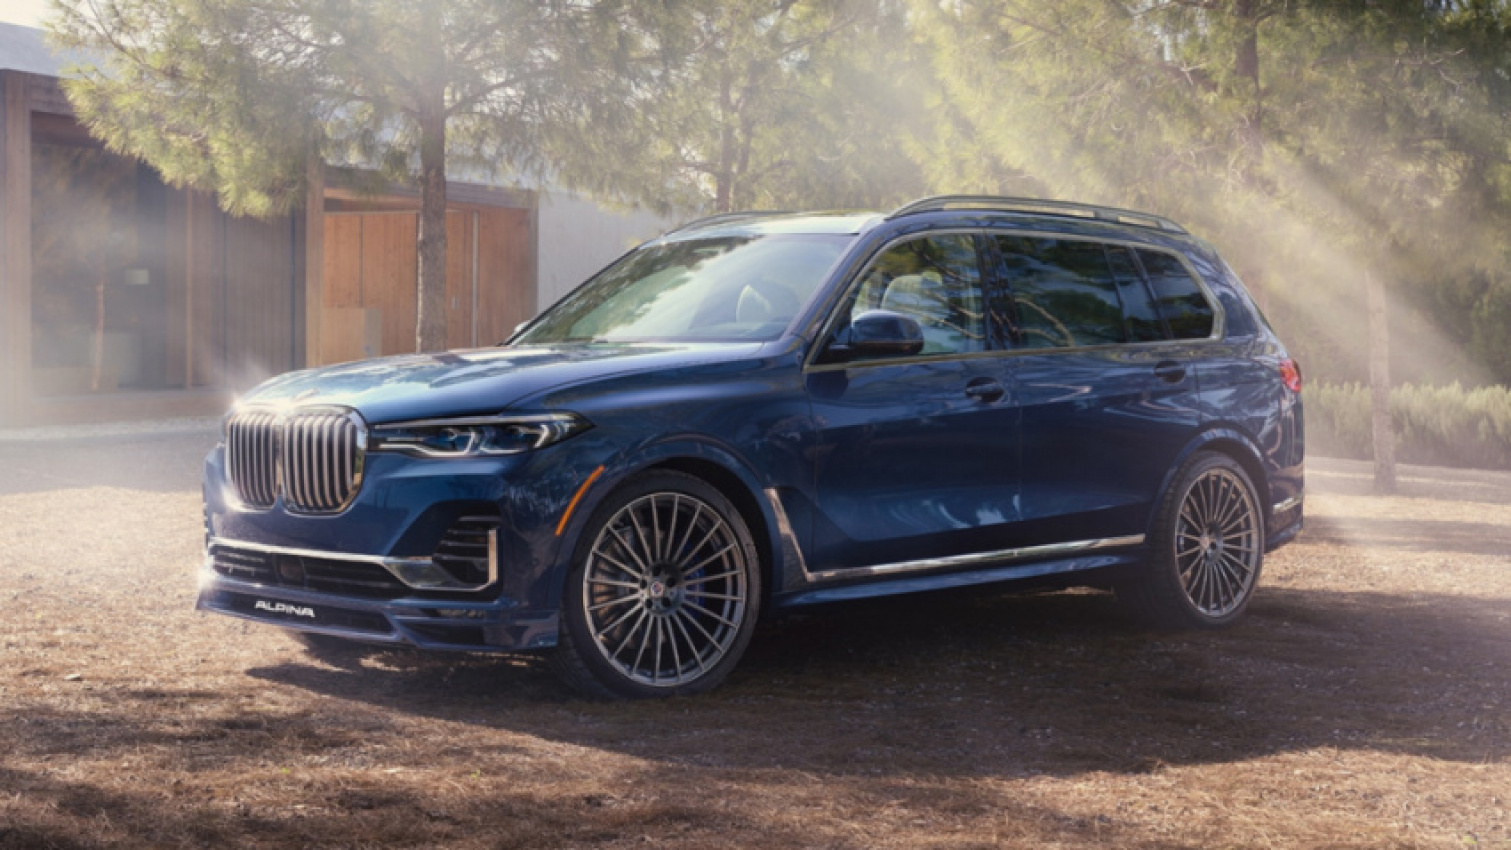 autos, bmw, cars, lincoln, bmw x7, lincoln navigator, vnex, the 2022 lincoln navigator battles the 2022 bmw x7 for consumer reports #1 spot